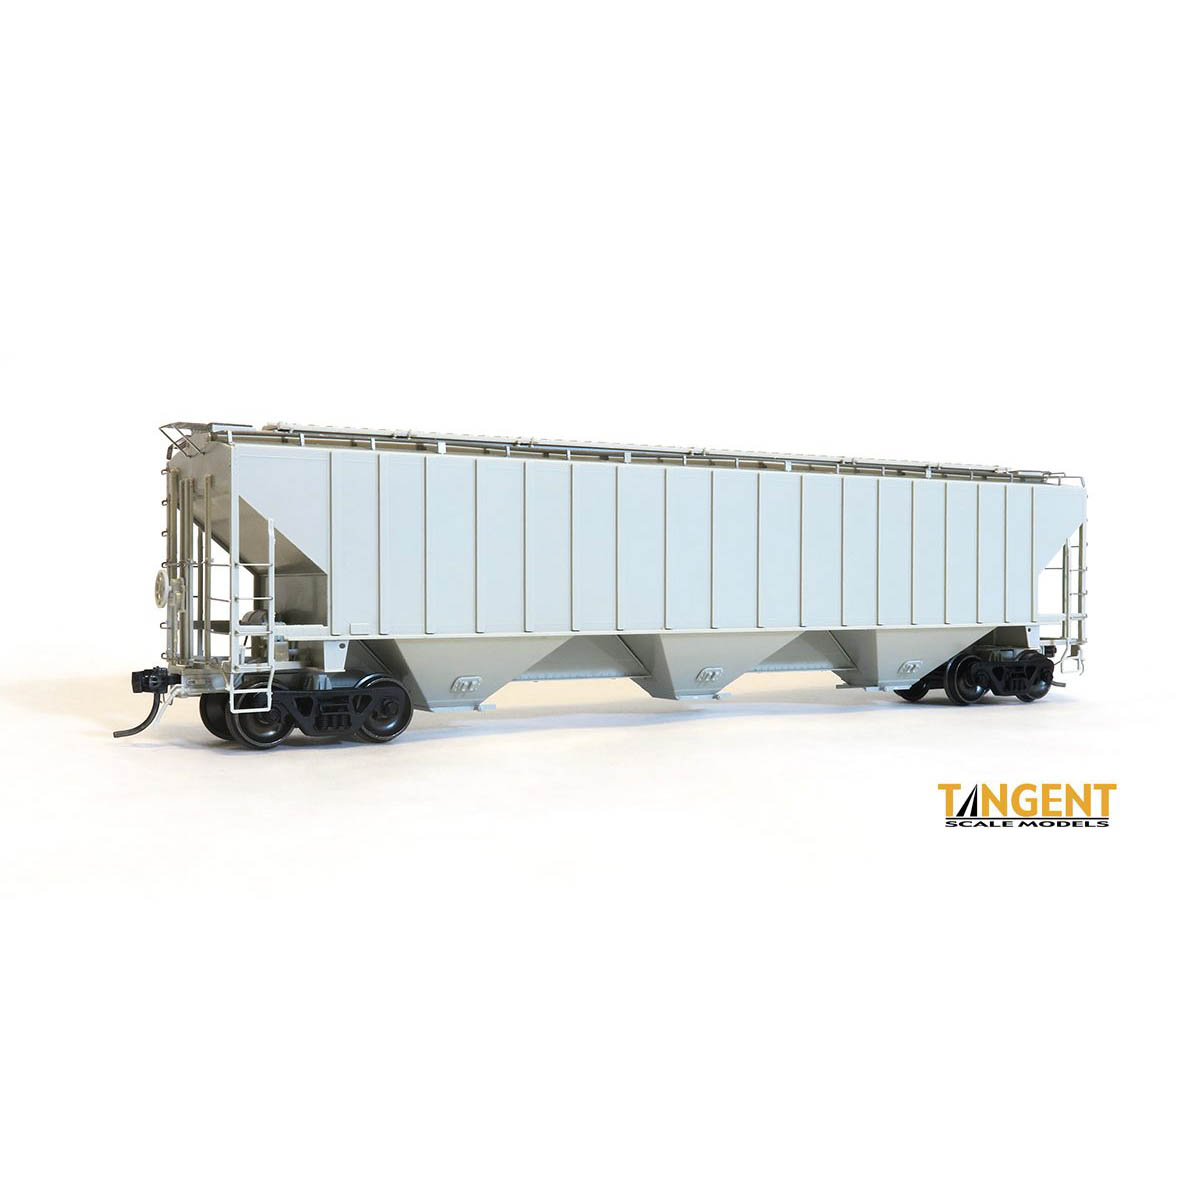 Tangent Scale Models Far-mar-co Ps-2 4750 Covered Hopper PTLX 20045 HO for sale online 